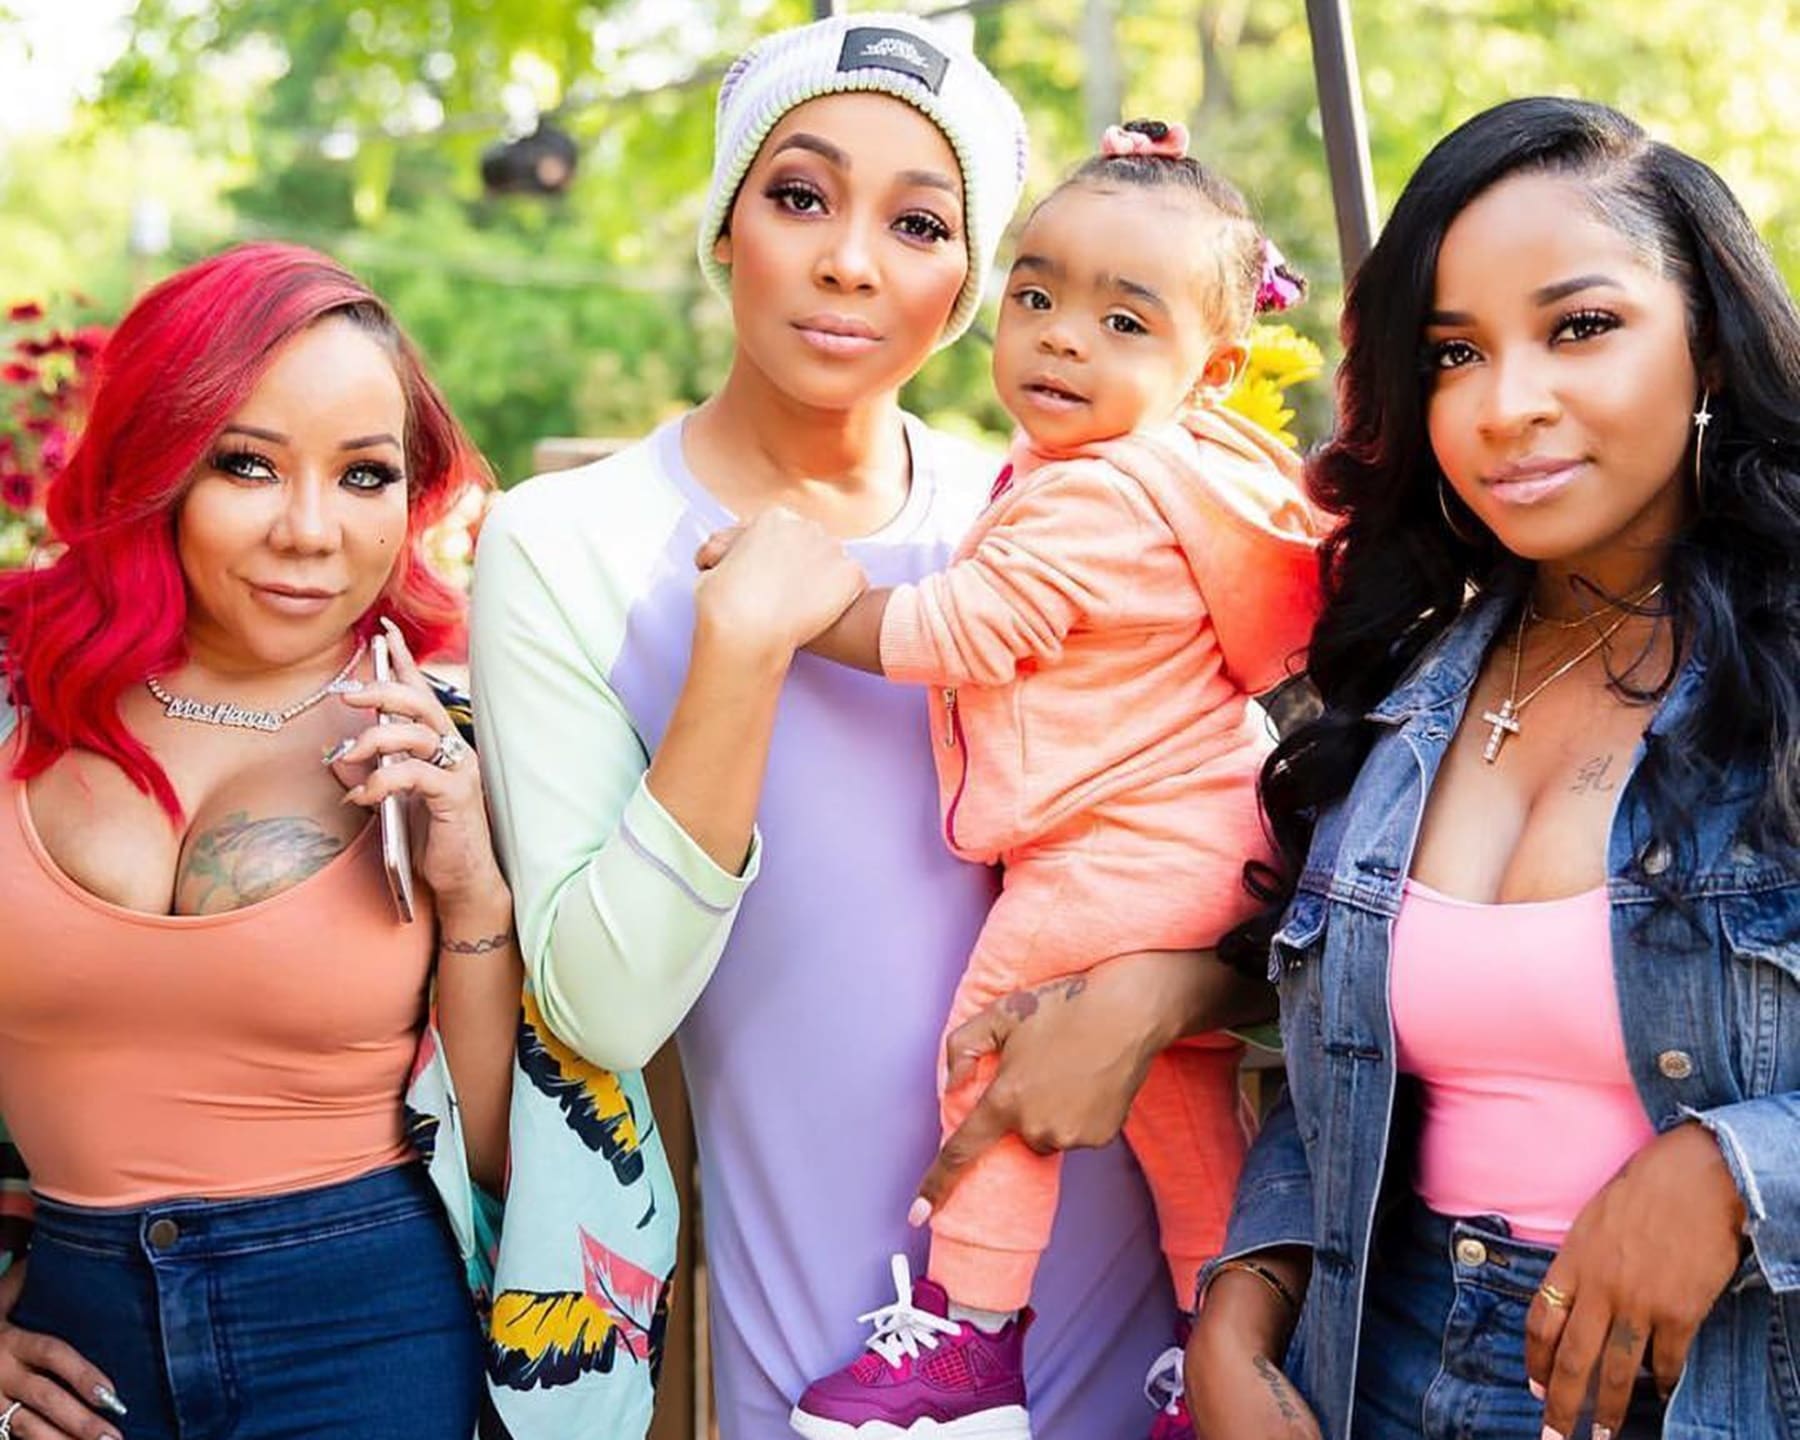 Tiny Harris Praises Her Friendship With Monica Brown And Fans Admire Their True, Strong Bond